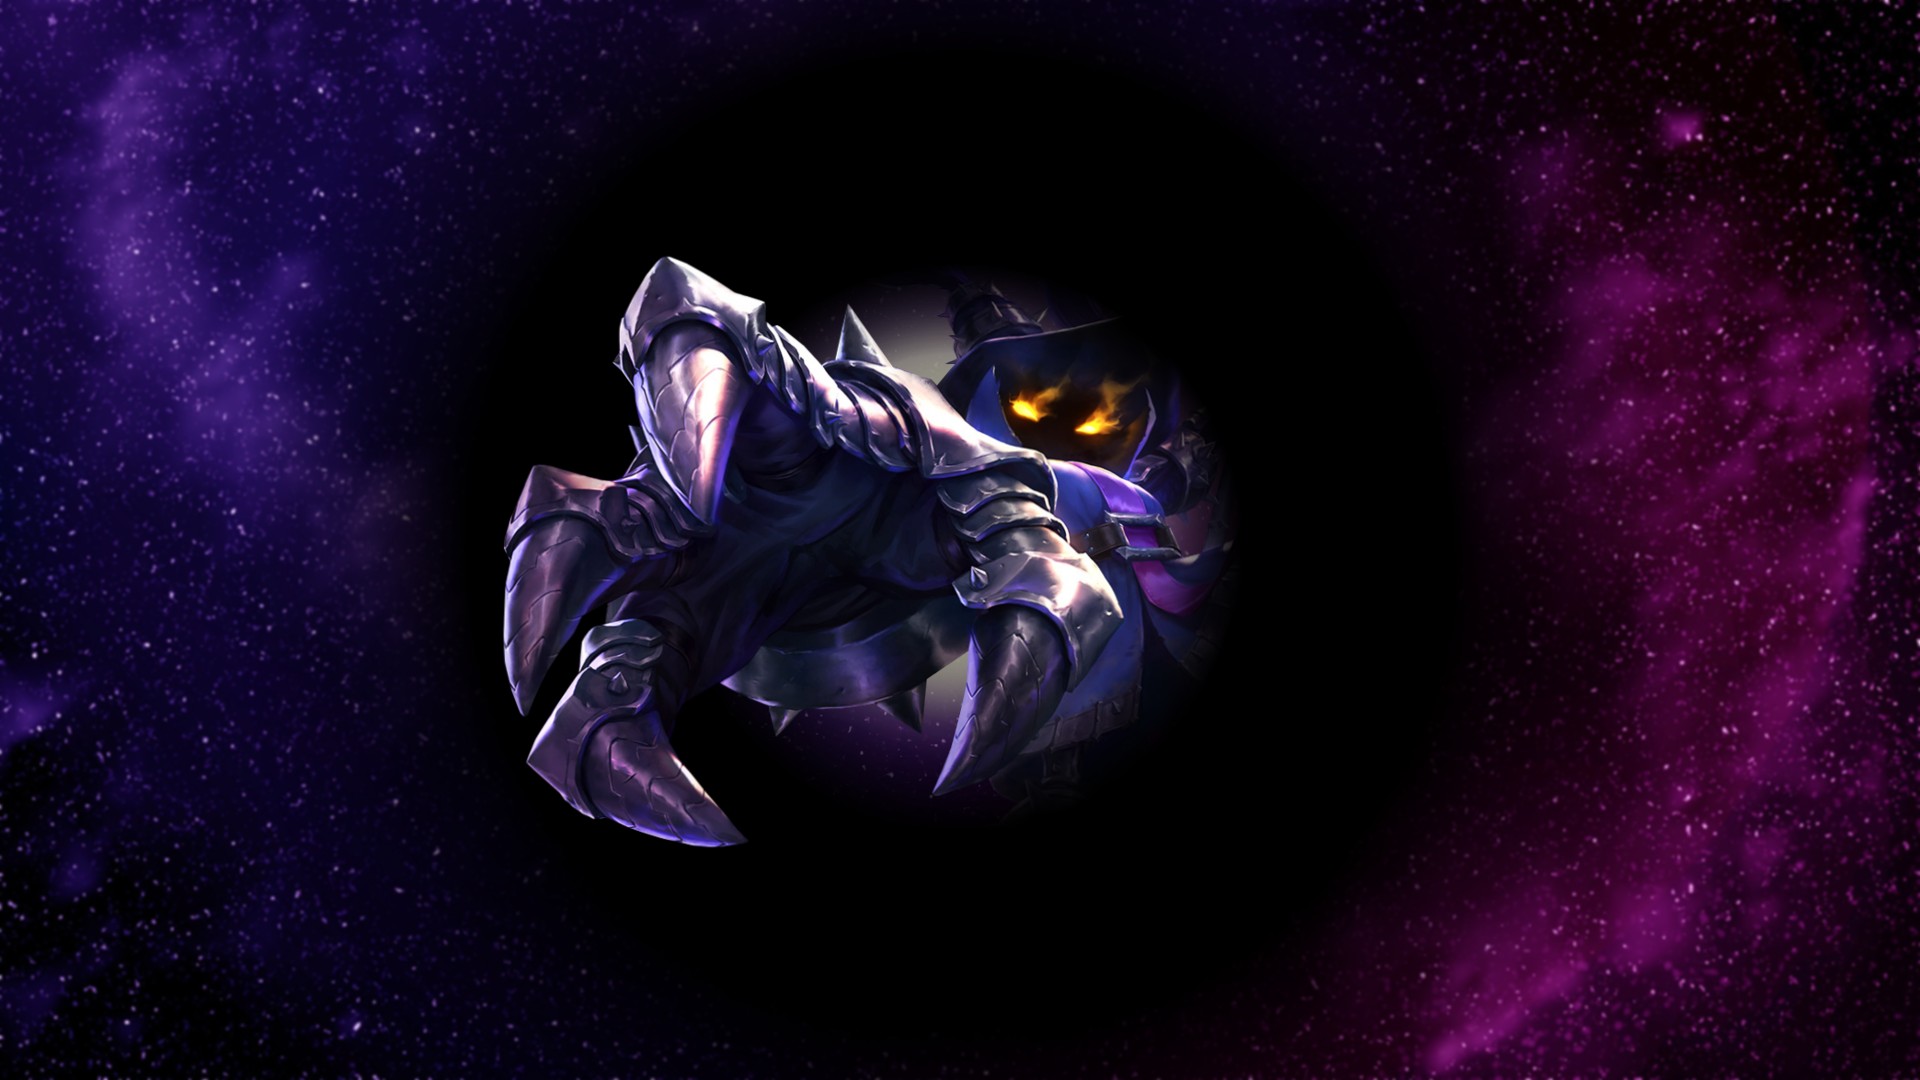 Veigar, League of Legends, Picture in picture, Space, Black holes, Stars Wallpaper